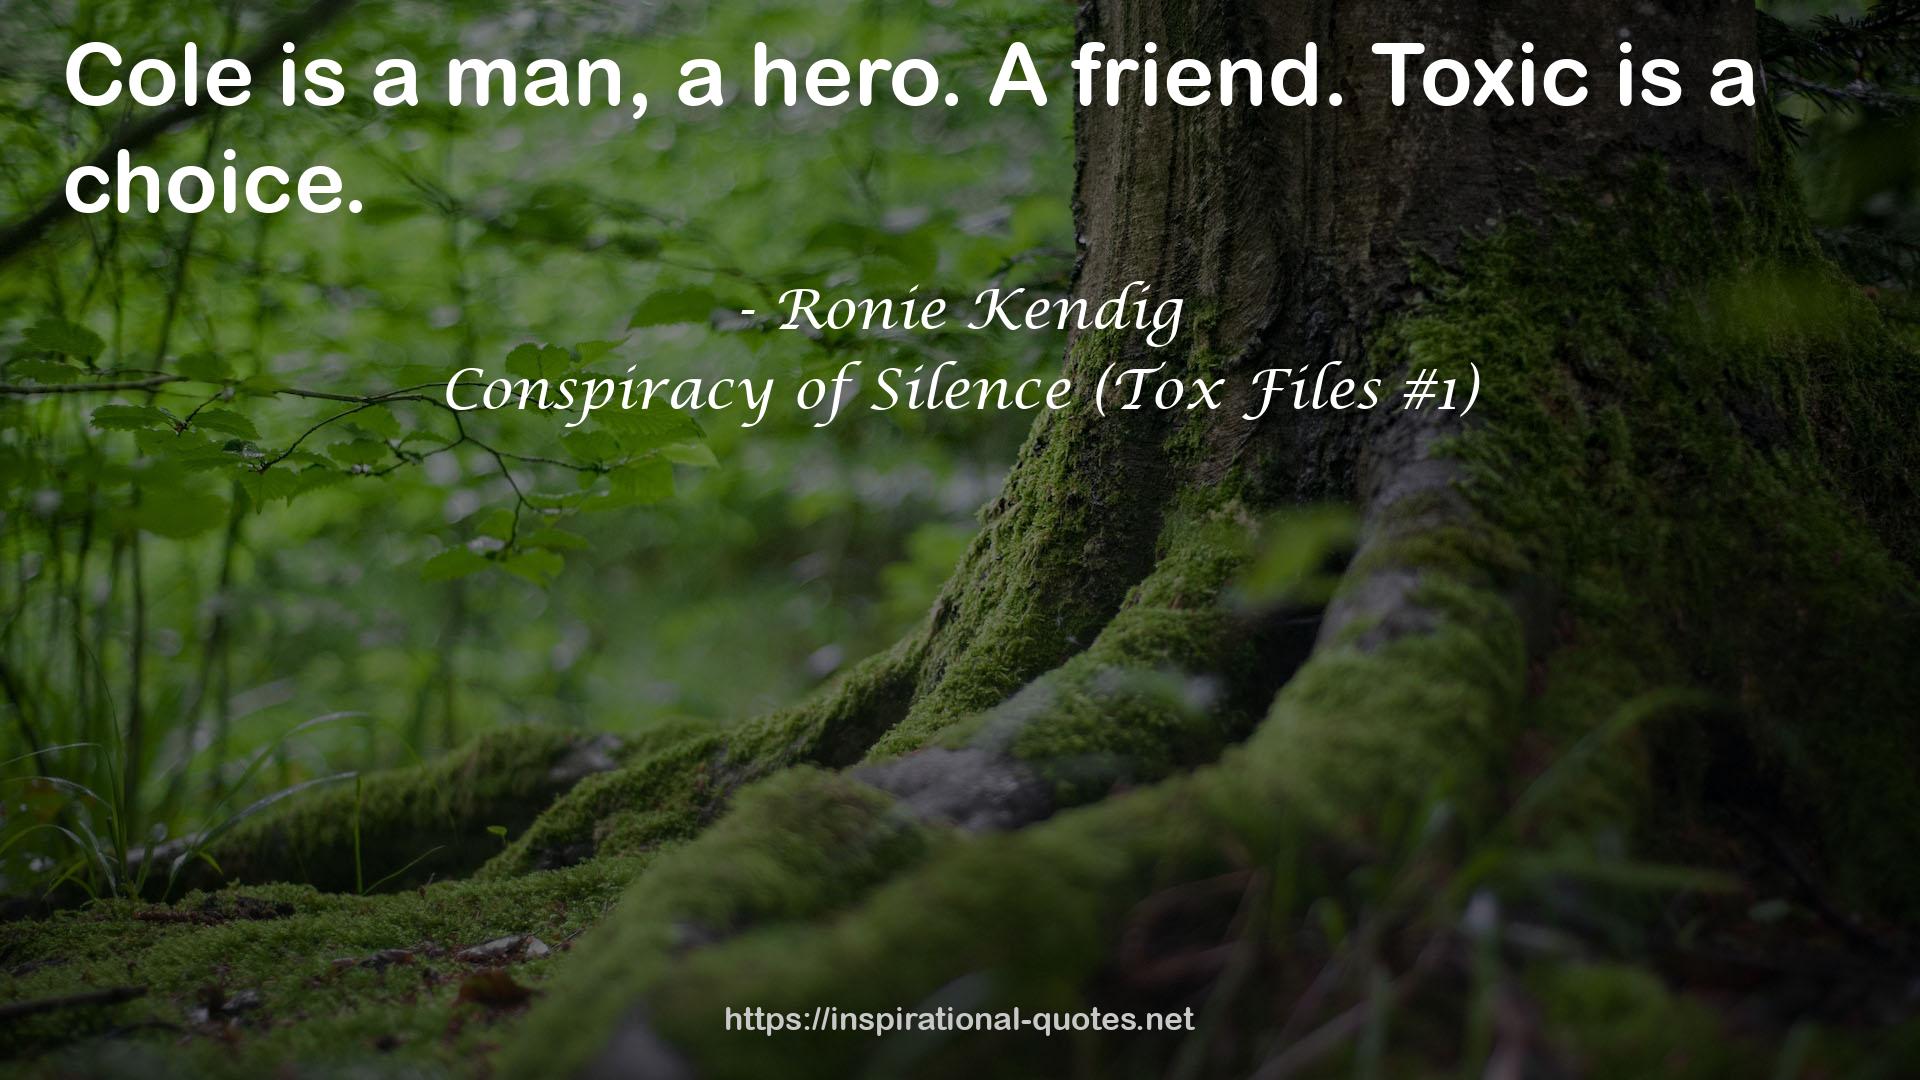 Conspiracy of Silence (Tox Files #1) QUOTES